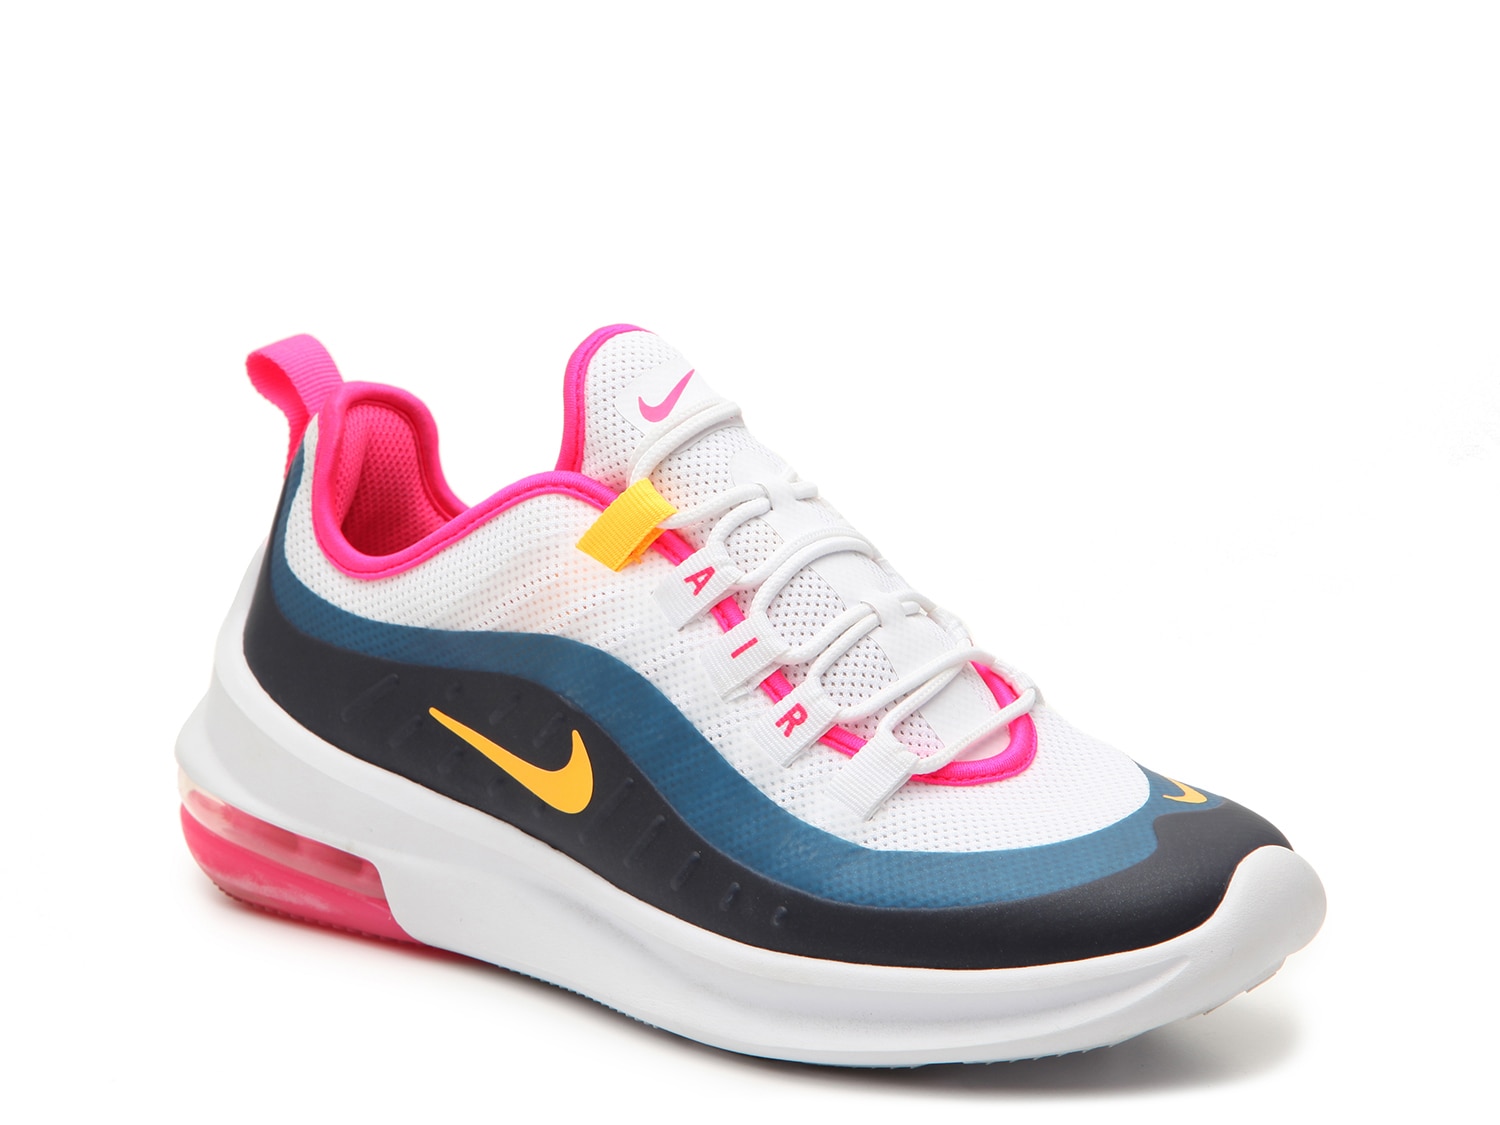 nike air max axis women's sneakers pink